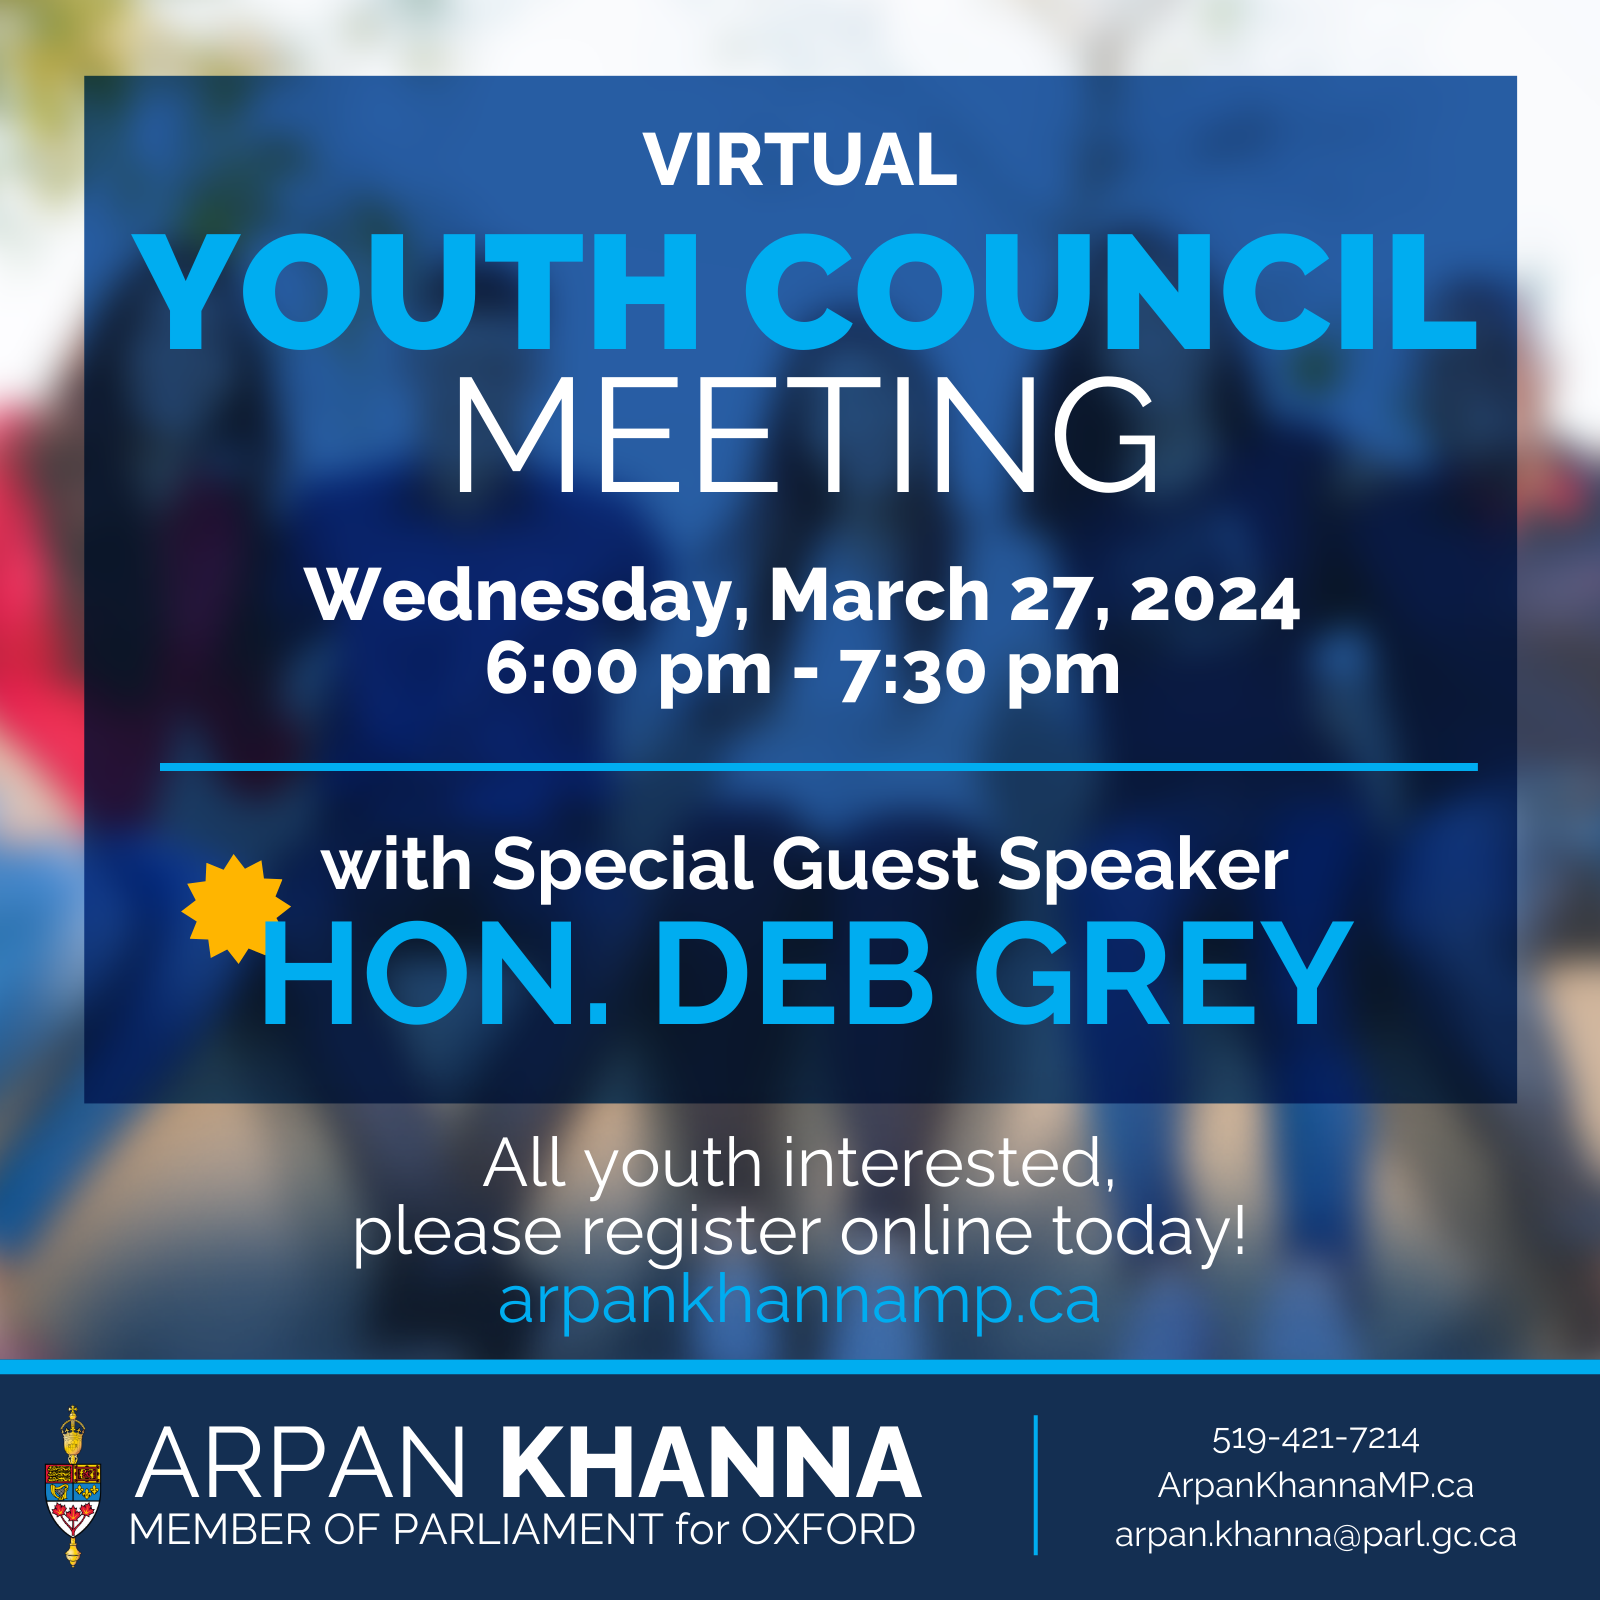 Join us for a *VIRTUAL* Youth Council meeting with special guest speaker Deborah Grey!